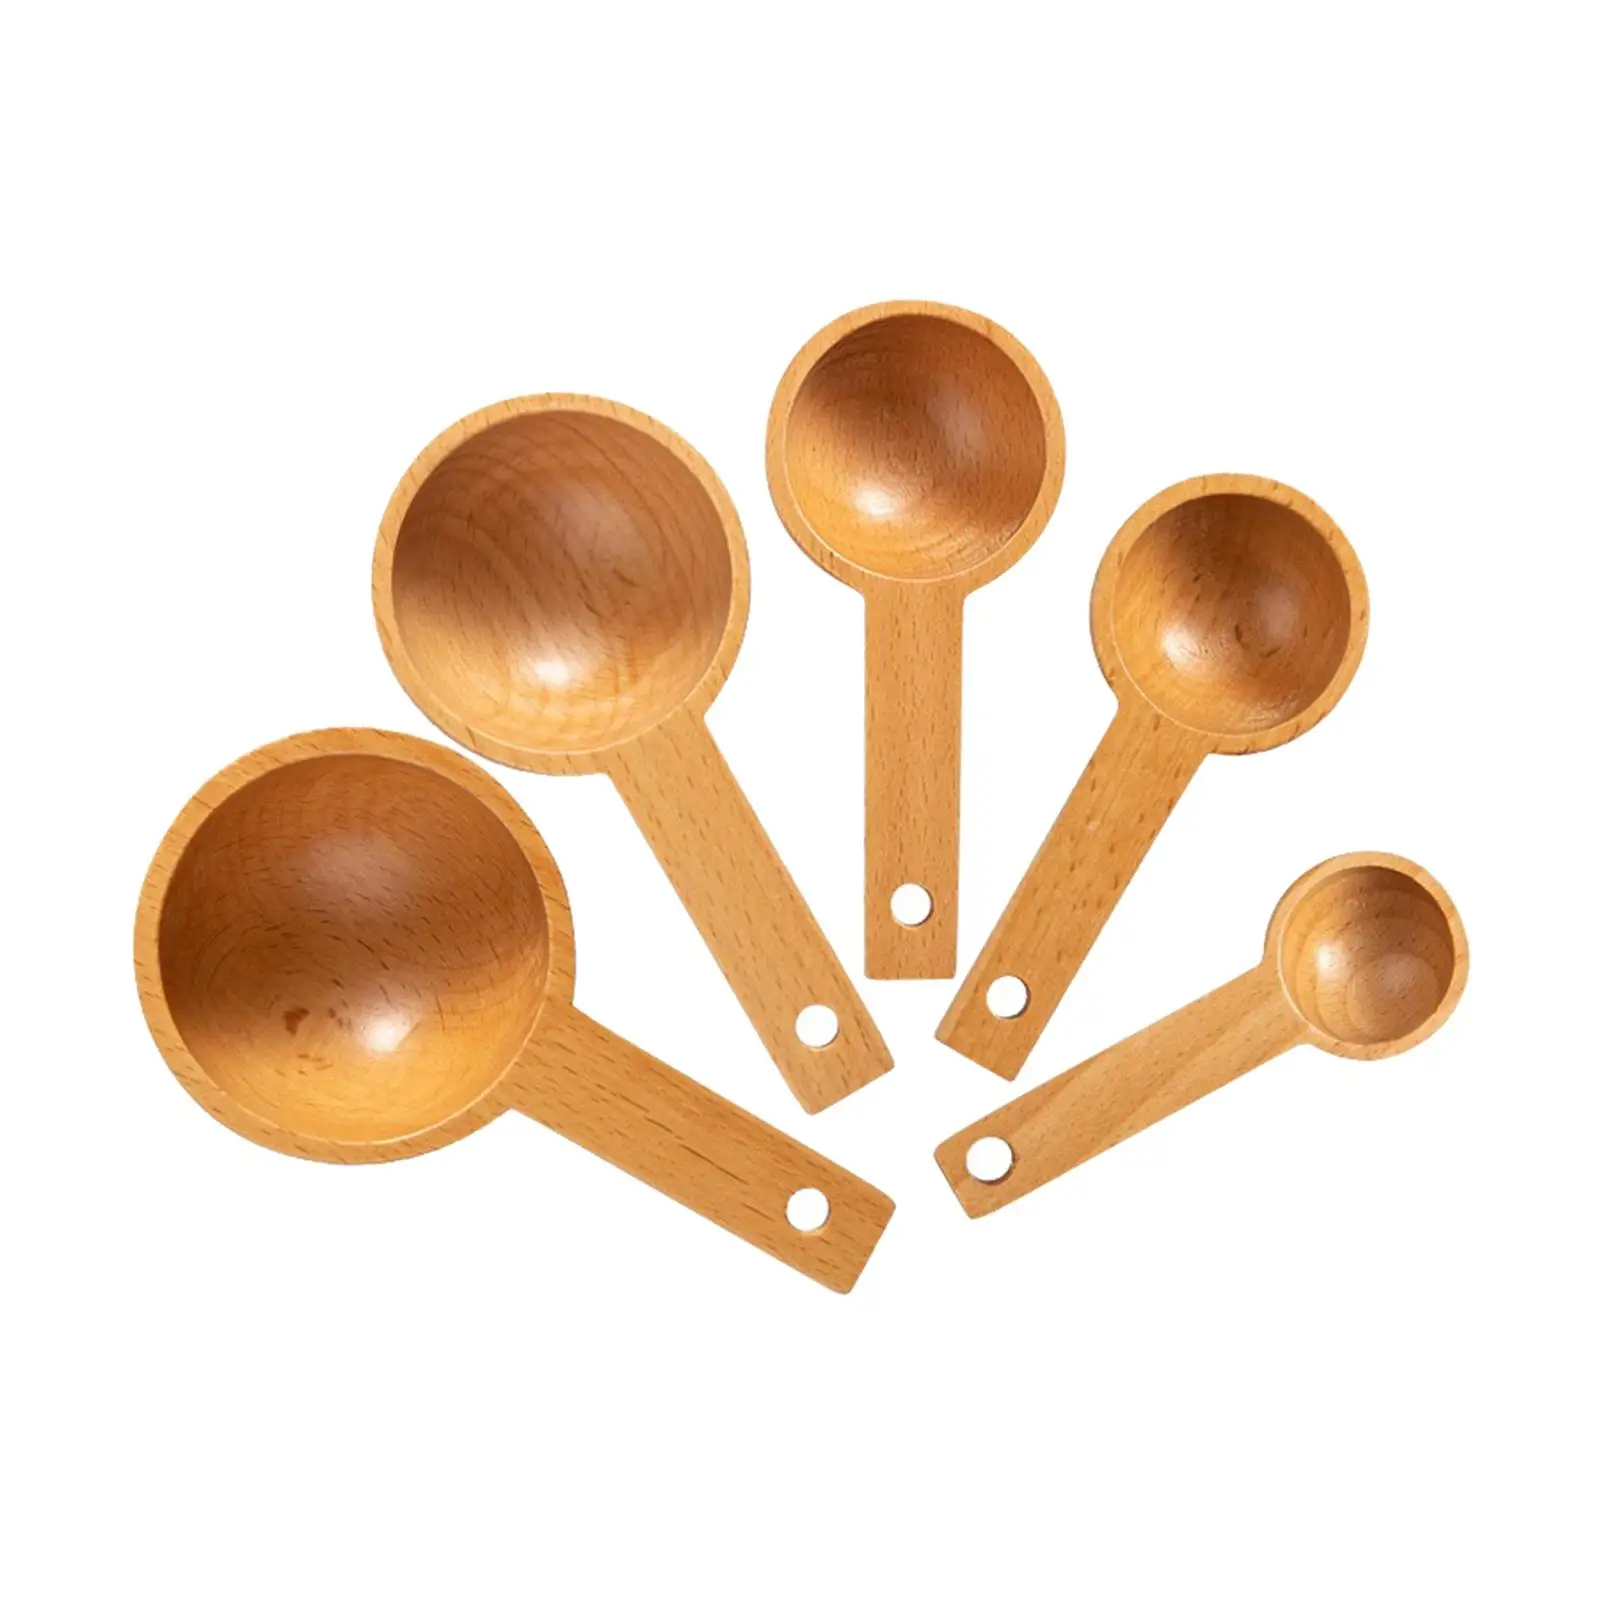 5 Pieces Wood Measuring Spoons Accessories Coffee Spoon Flour Scoop for Dry Liquid Food